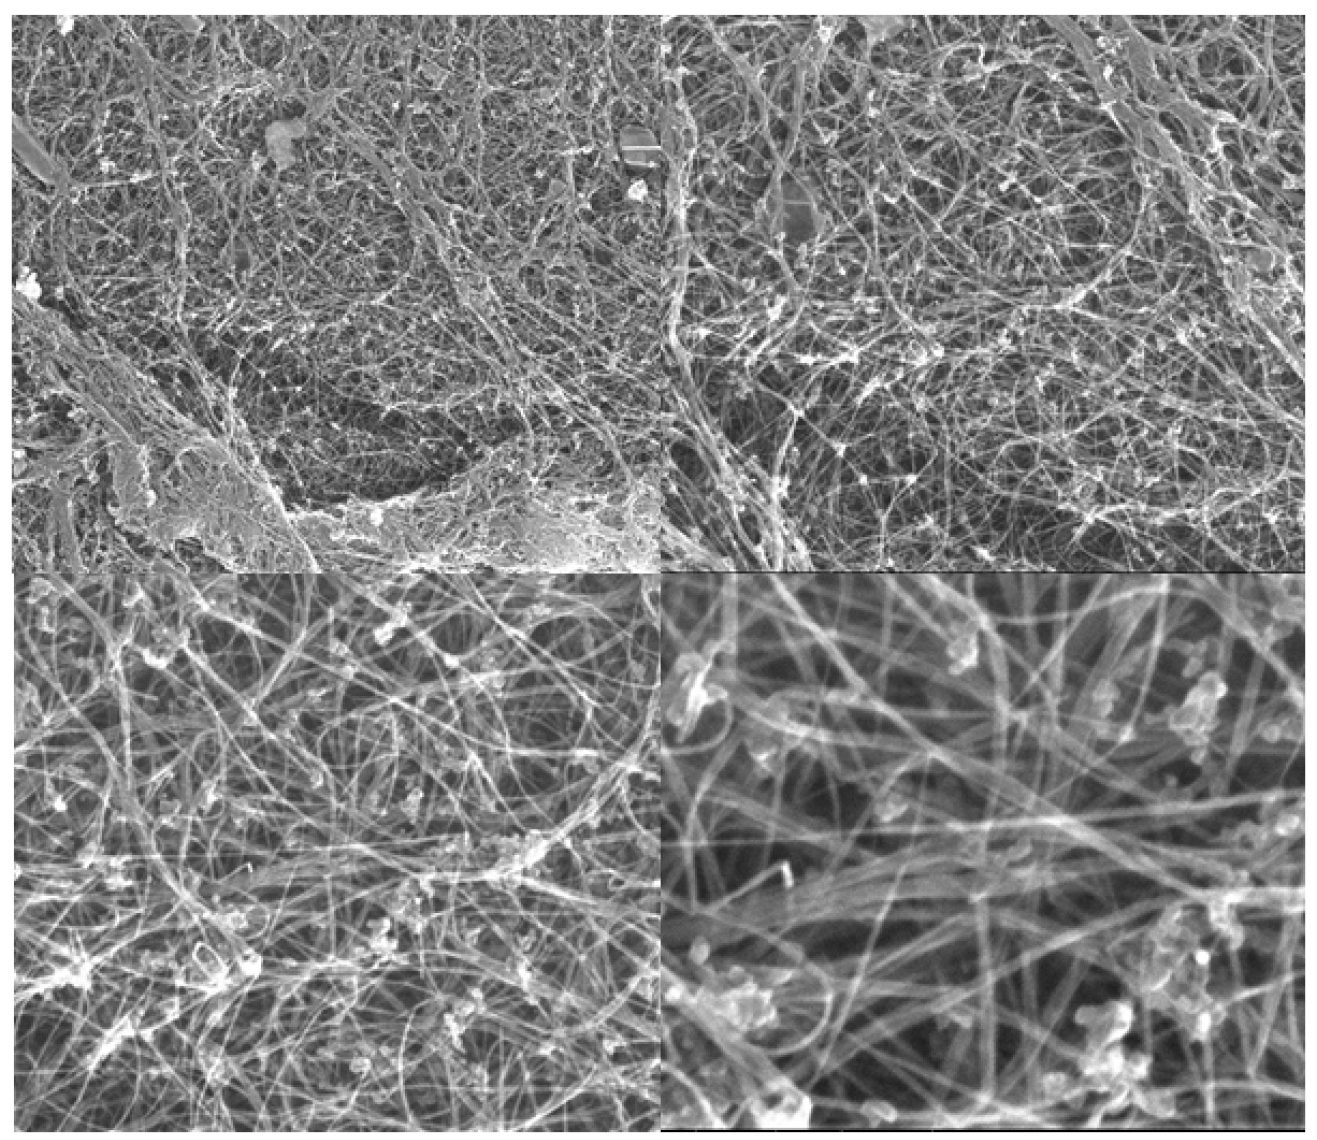 An example of a sheet of carbon nanotubes at 25,000x magnification.